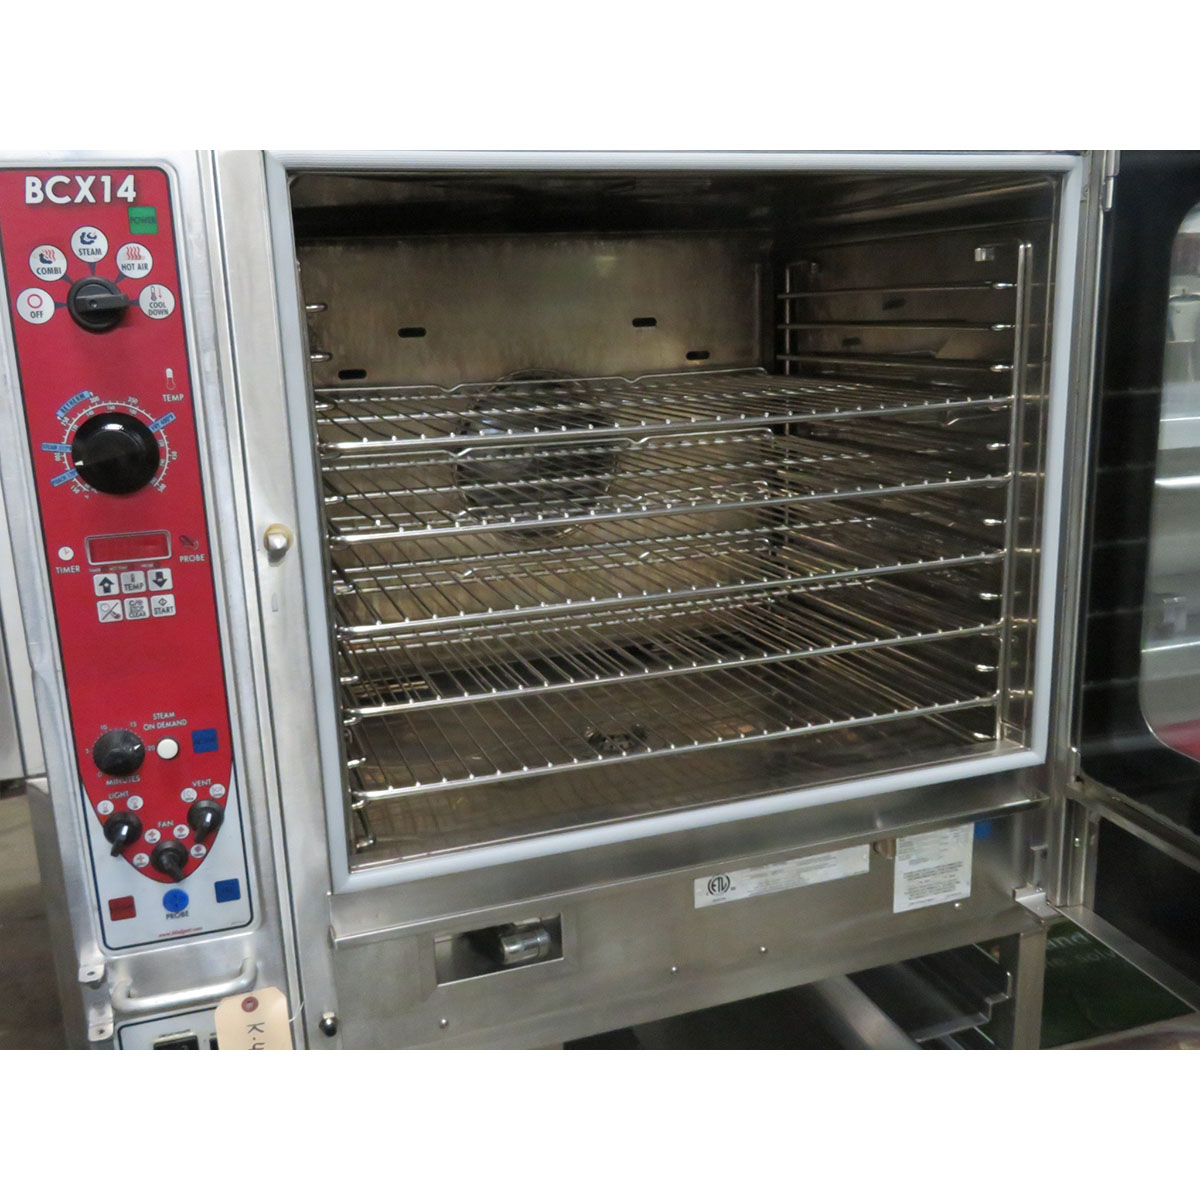 Blodgett BCX14 Combi Oven Natrual Gas, Used Excellent Condition image 4